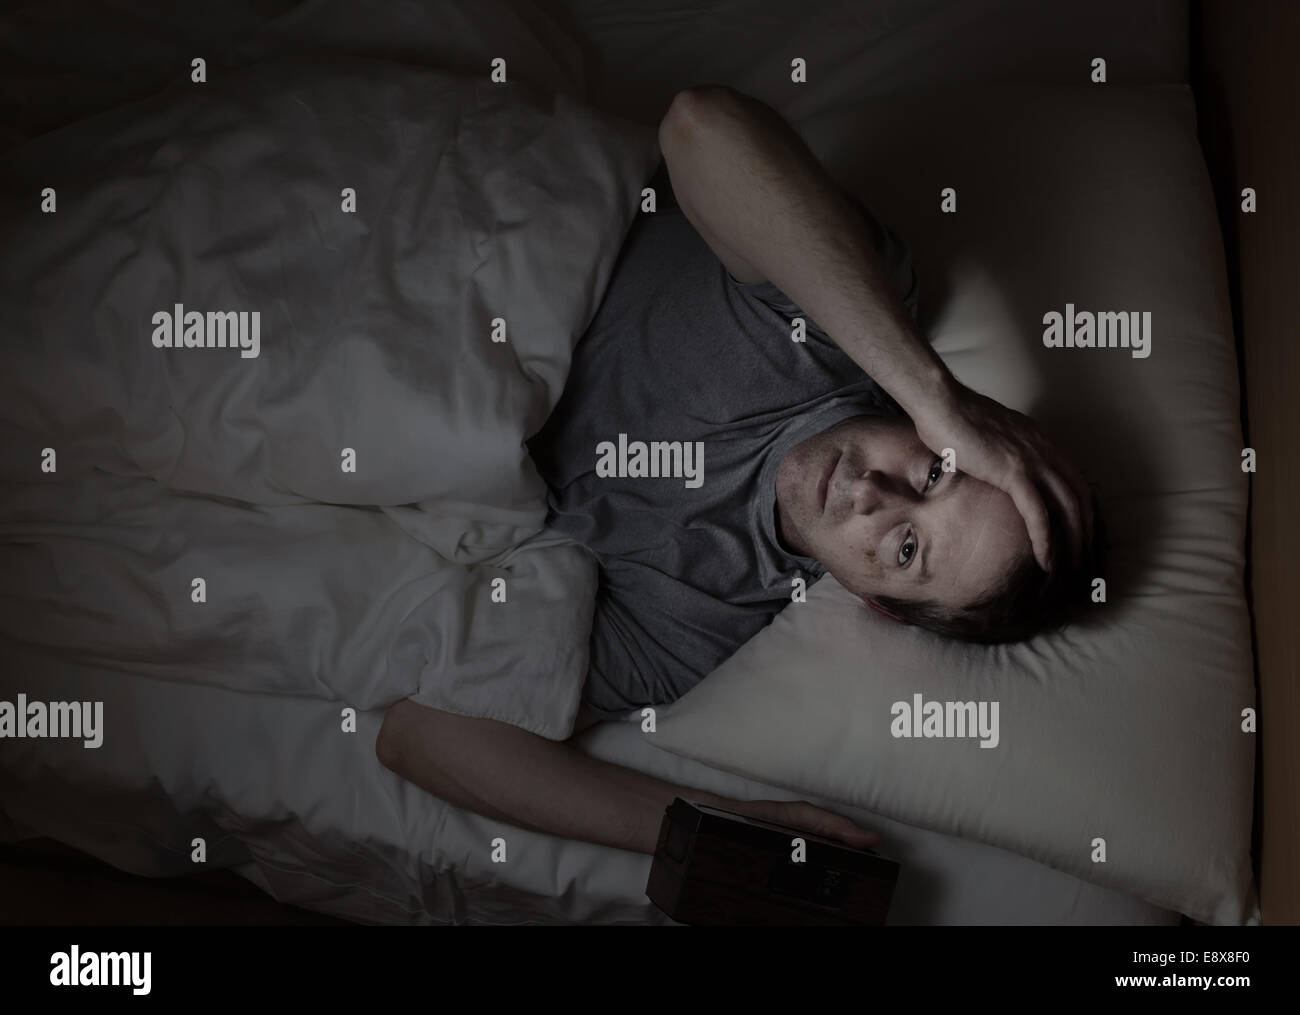 Top view image of mature man, looking forward, having trouble sleeping from insomnia Stock Photo